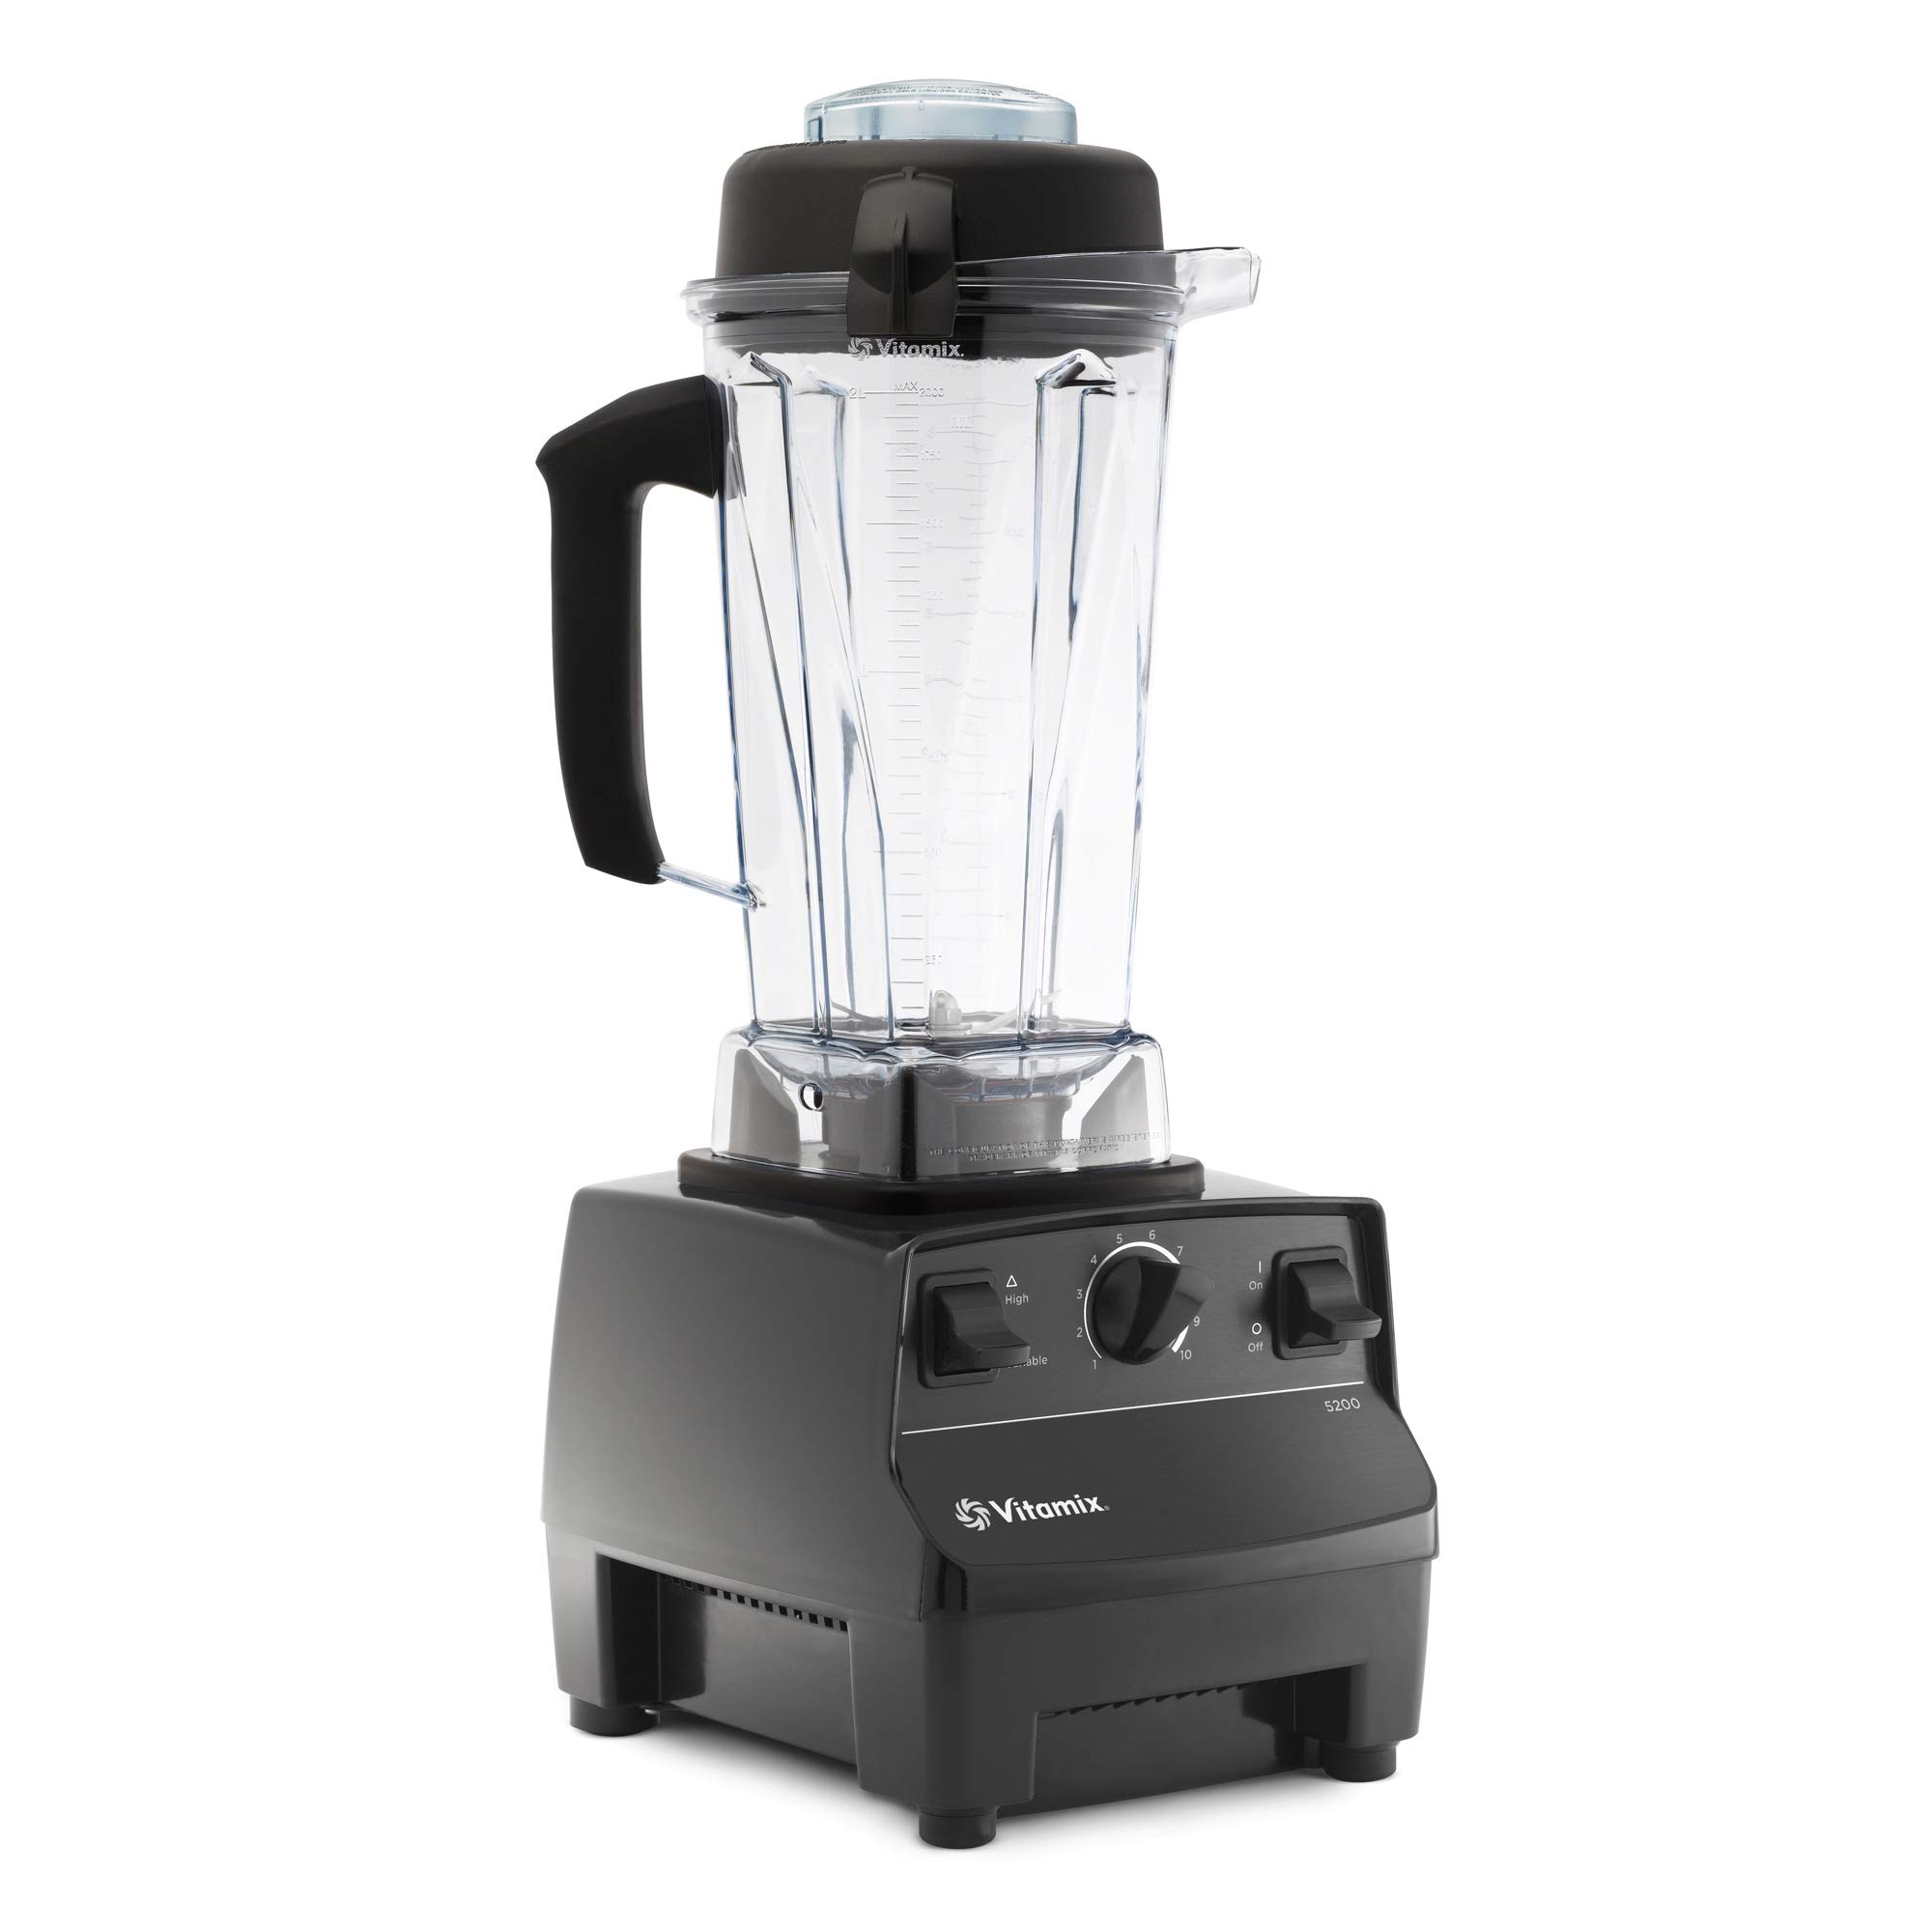 Vitamix 5200 Blender Professional-Grade, Self-Cleaning 64 oz Container, Black - 001372 $379.95